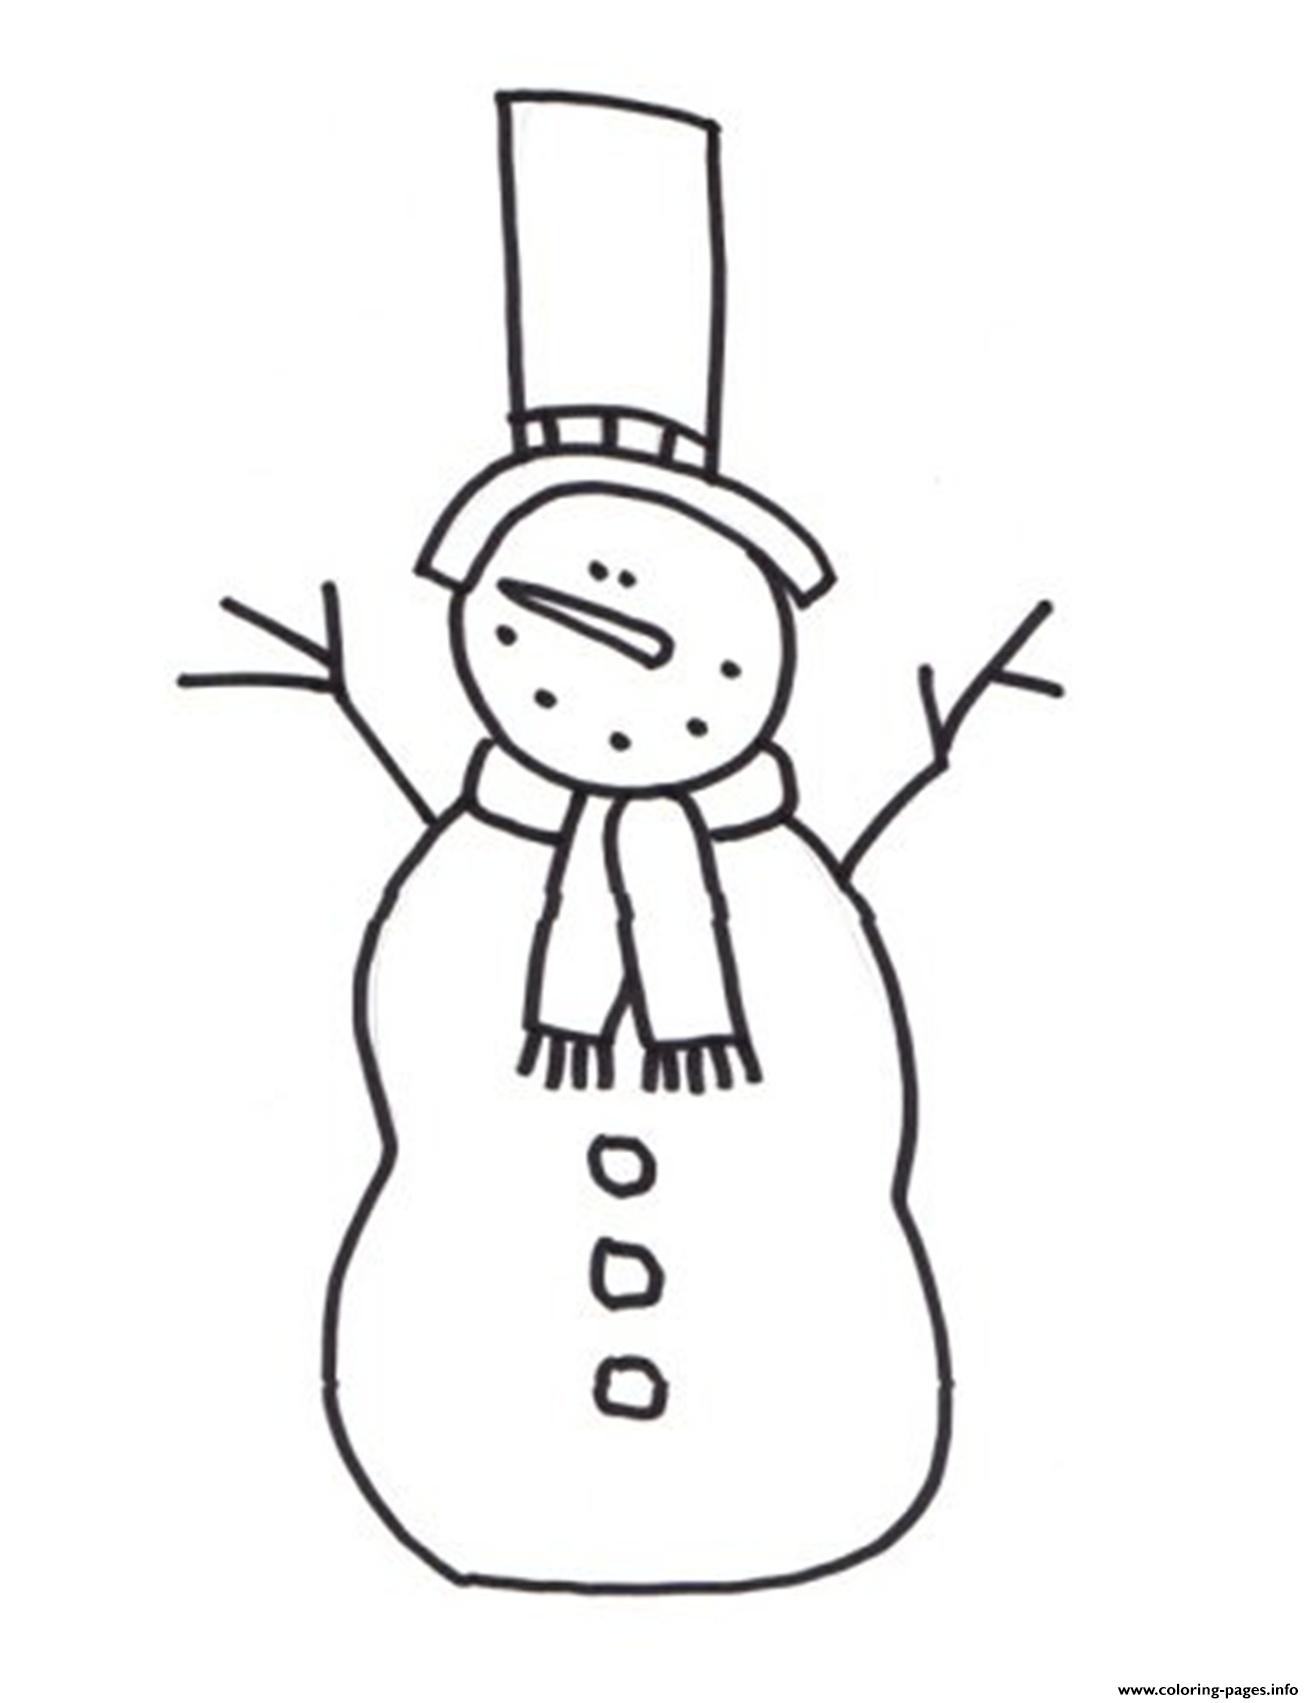 Snowman S For Childrenb2f9 coloring